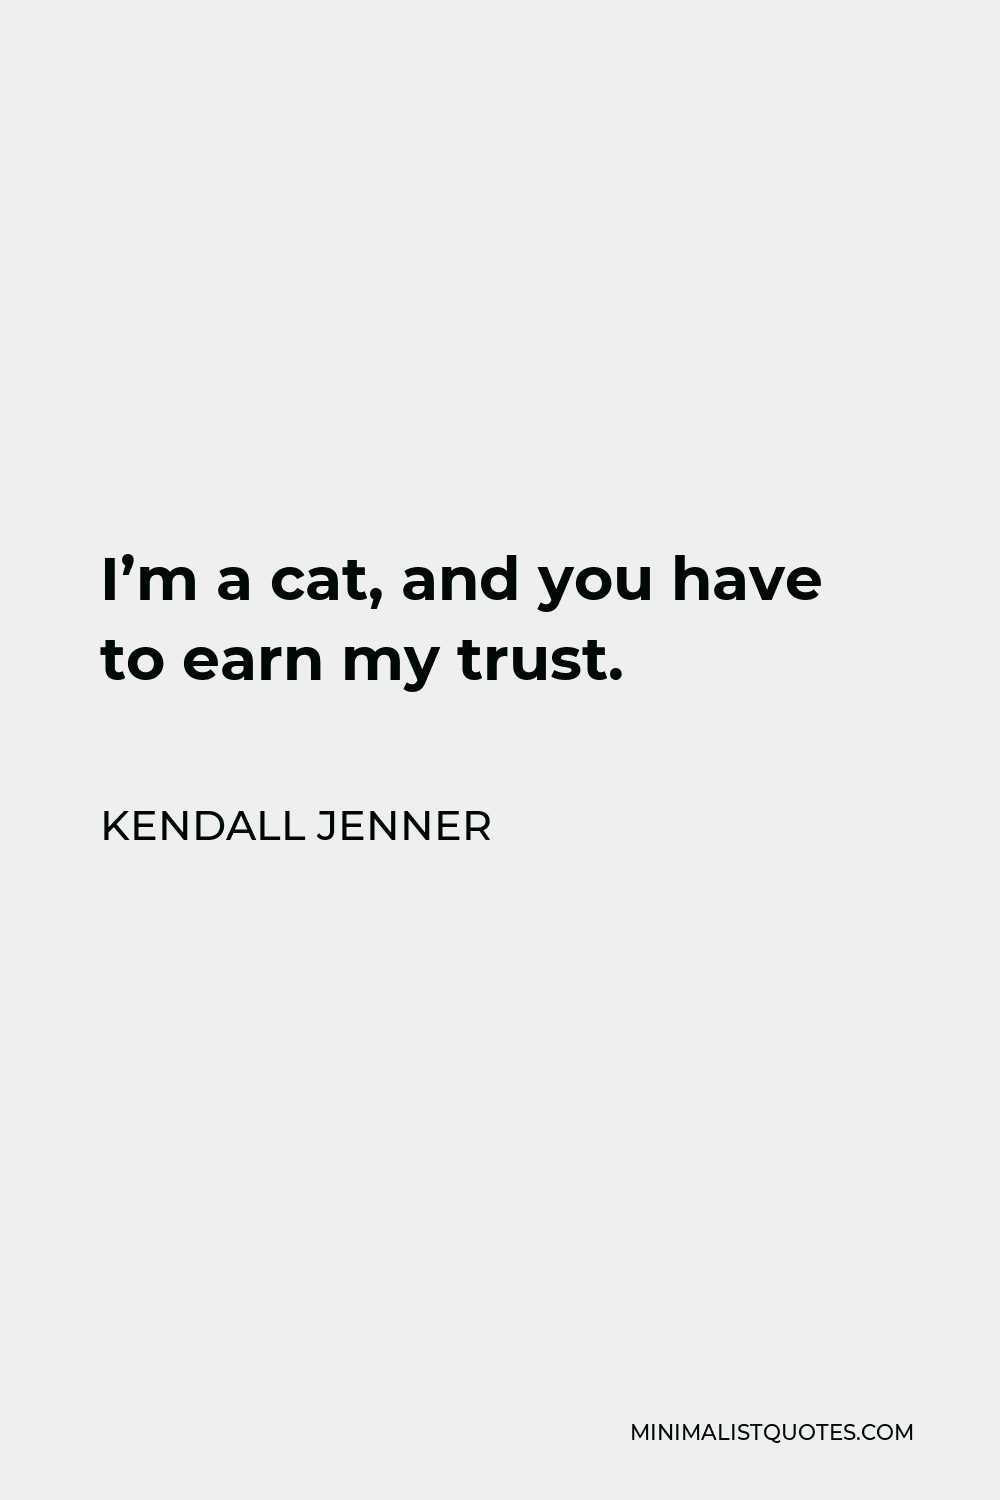 Kendall Jenner Quote - I’m a cat, and you have to earn my trust.